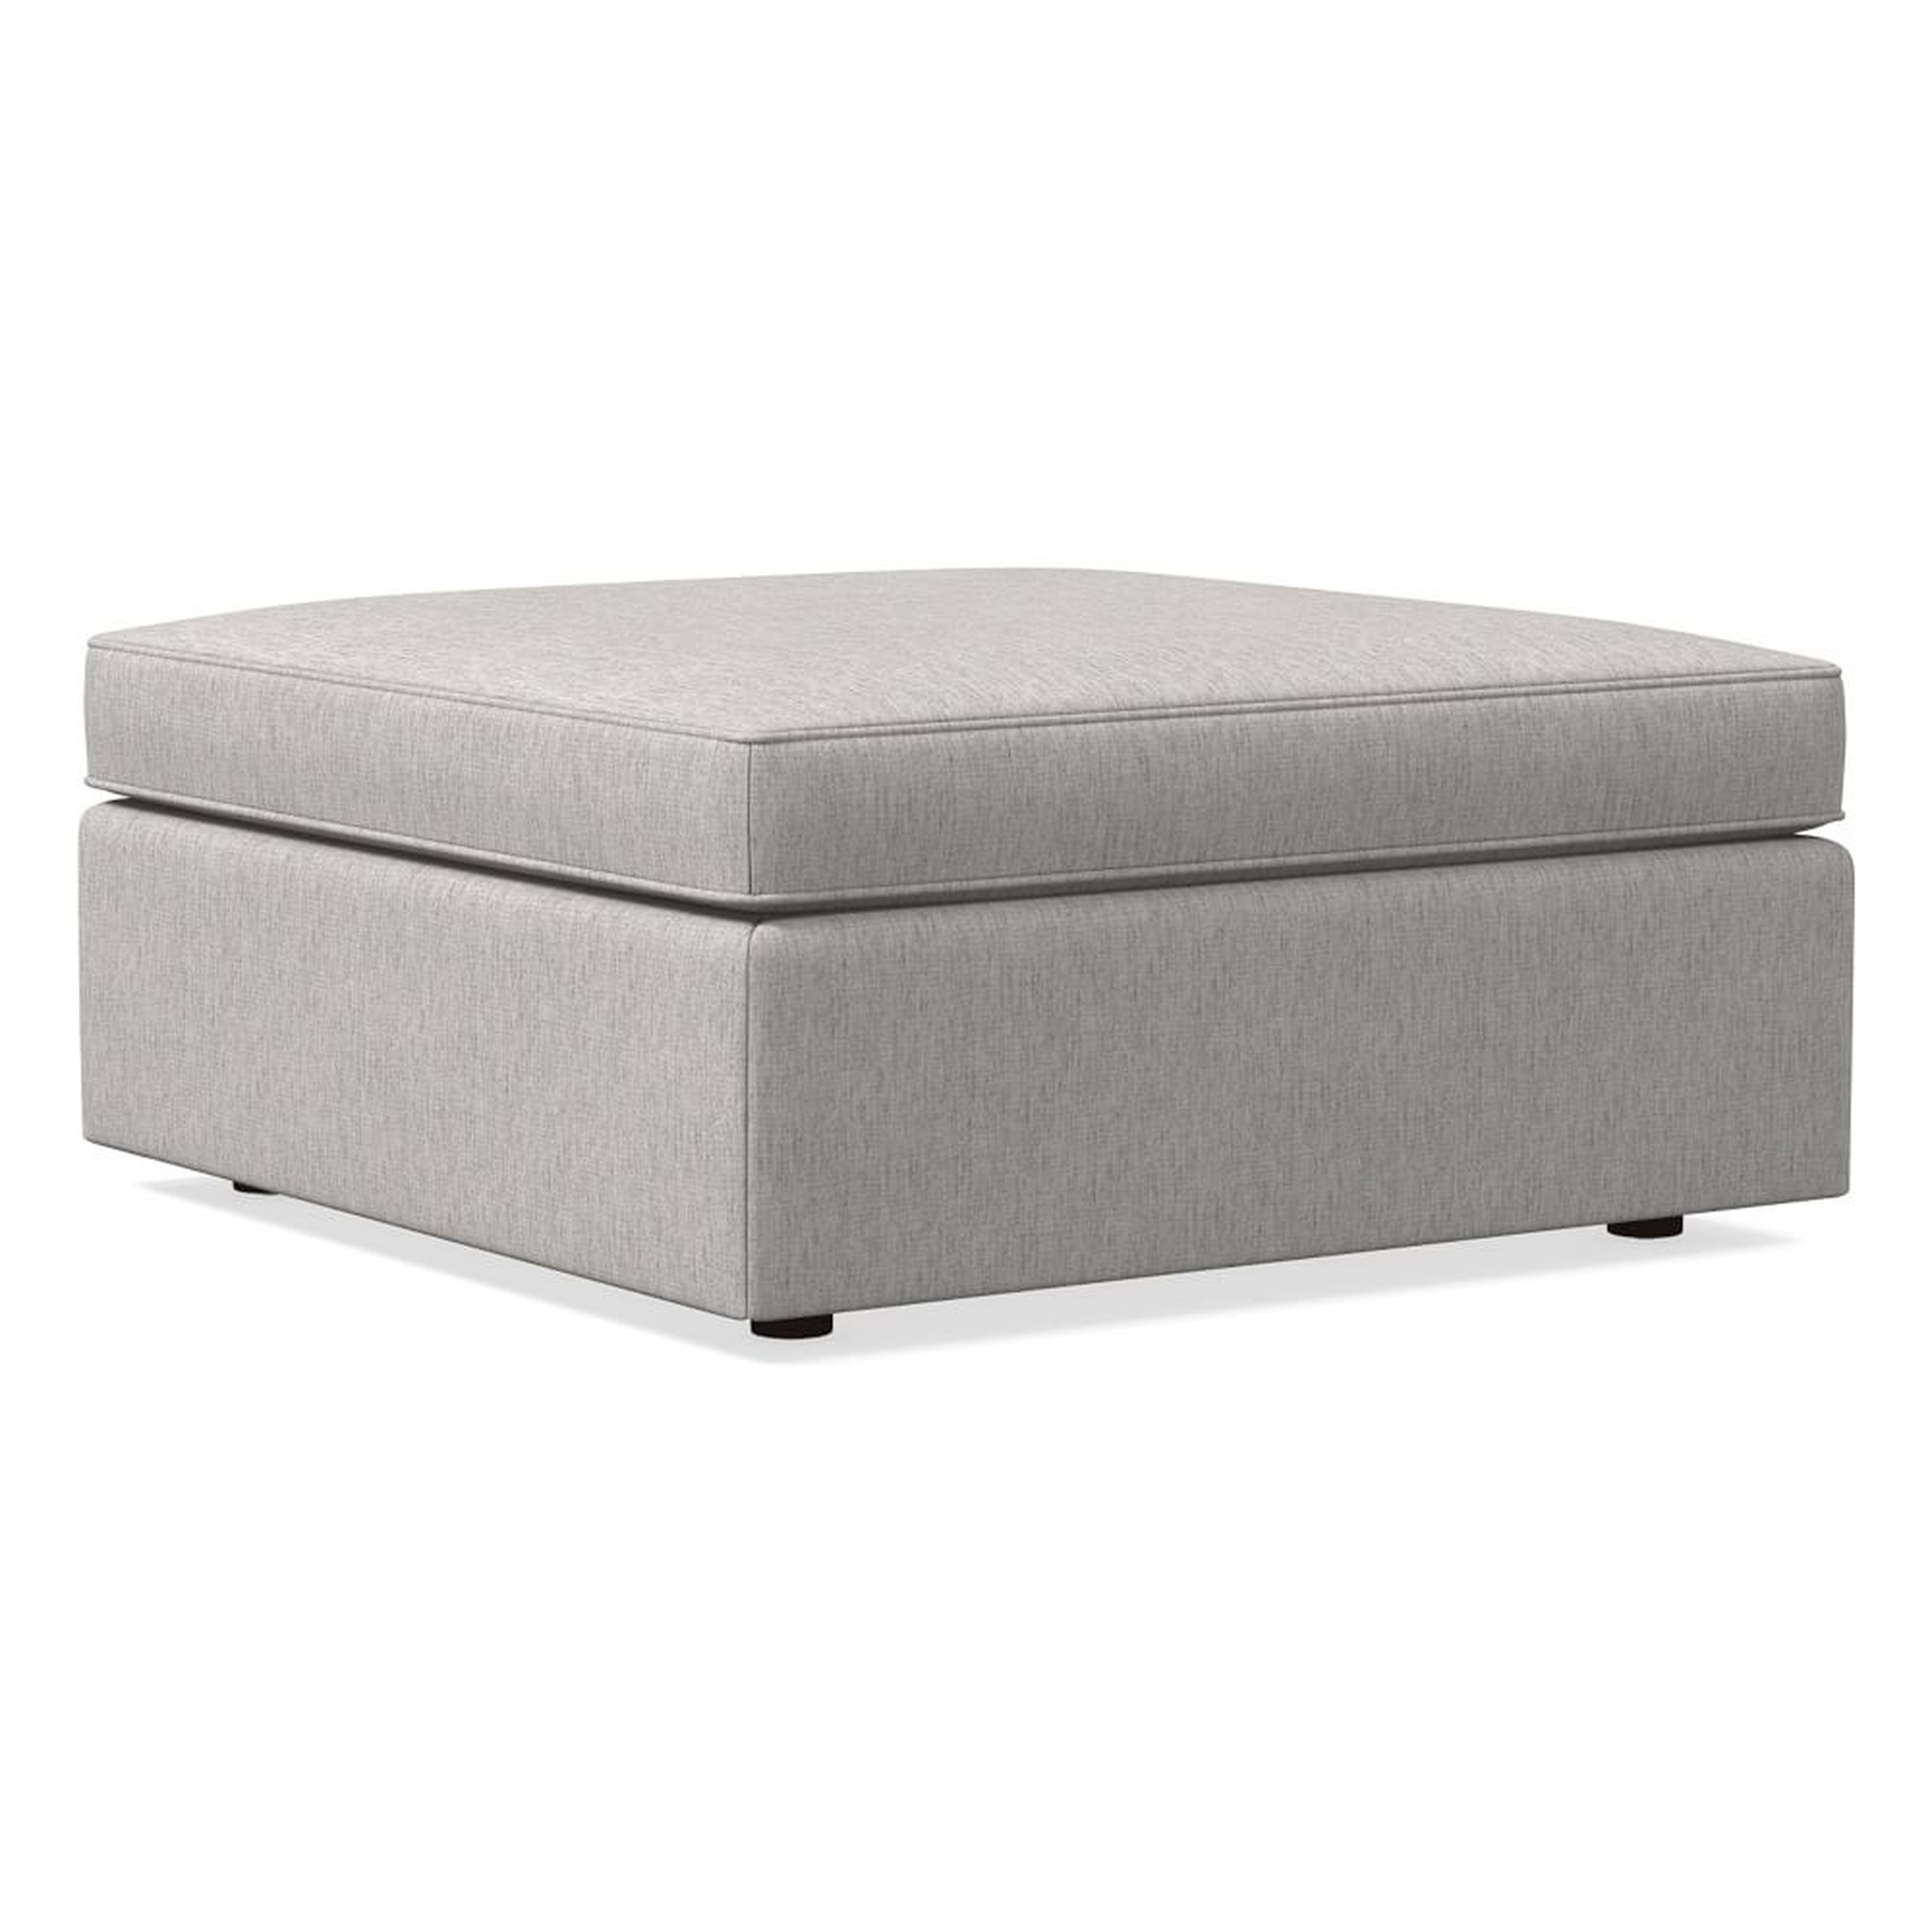 Harris Large Square Ottoman, Poly, Performance Coastal Linen, Storm Gray, Concealed Supports - West Elm